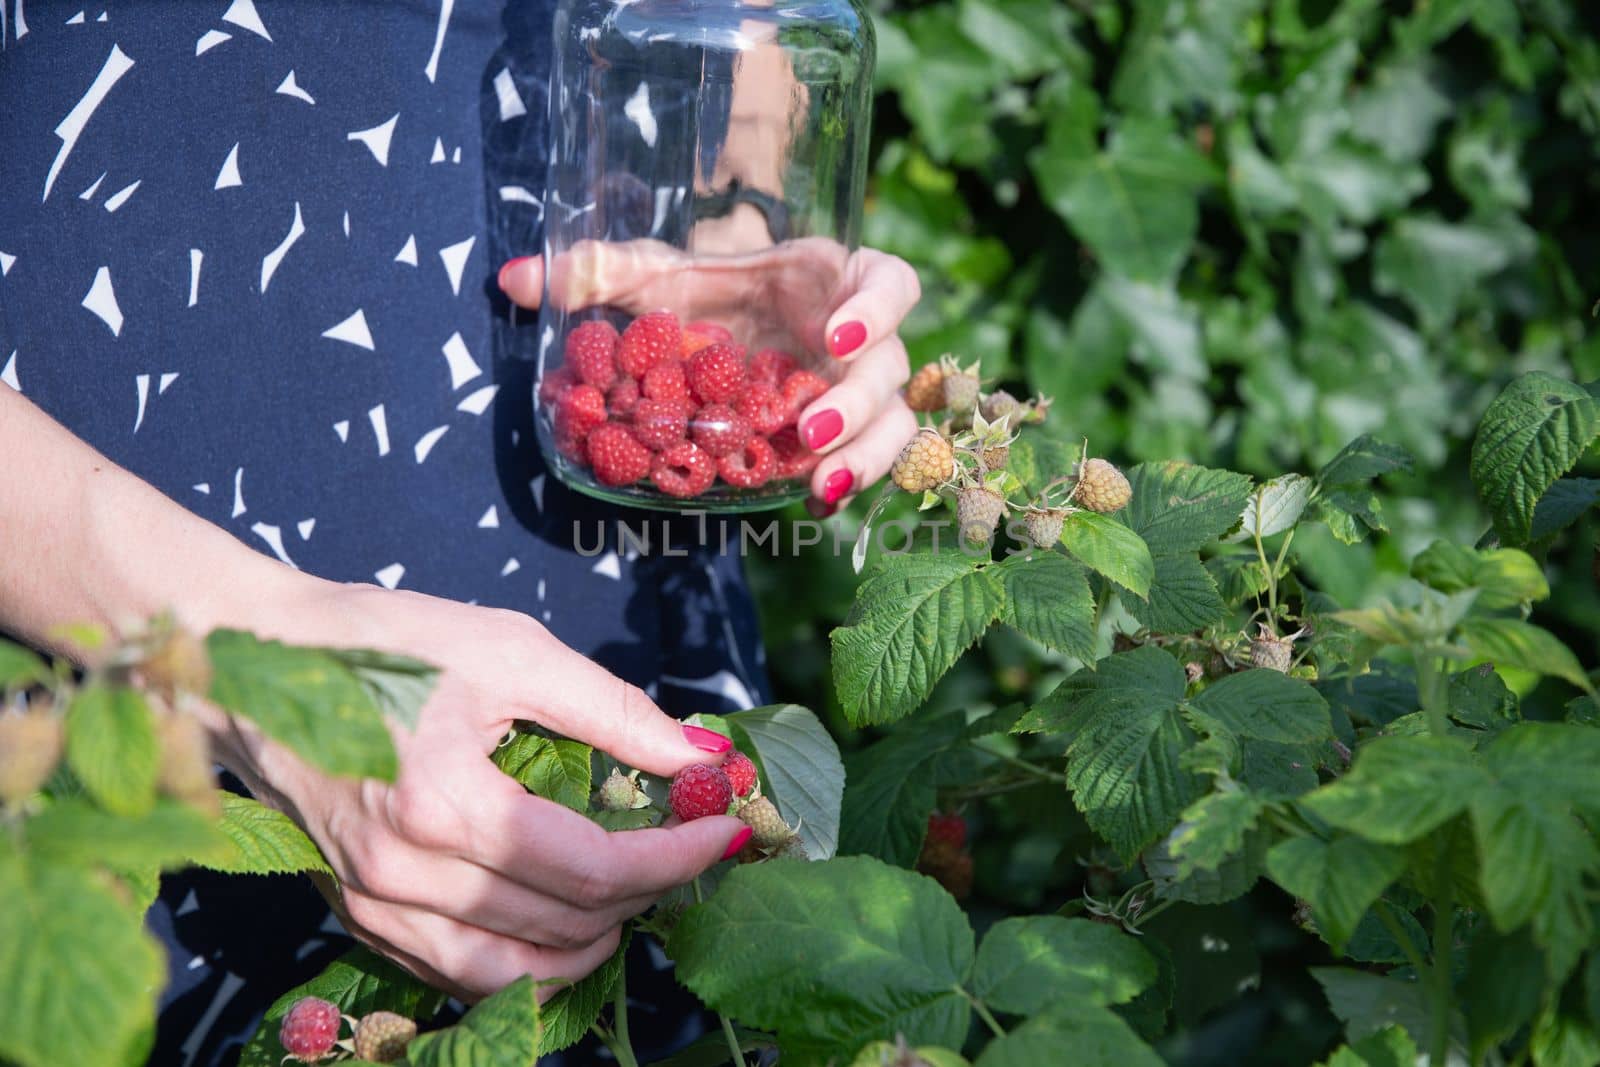 yung woman picks ripe raspberries in a basket, summer harvest of berries and fruits, sweet vitamins all year round. High quality photo